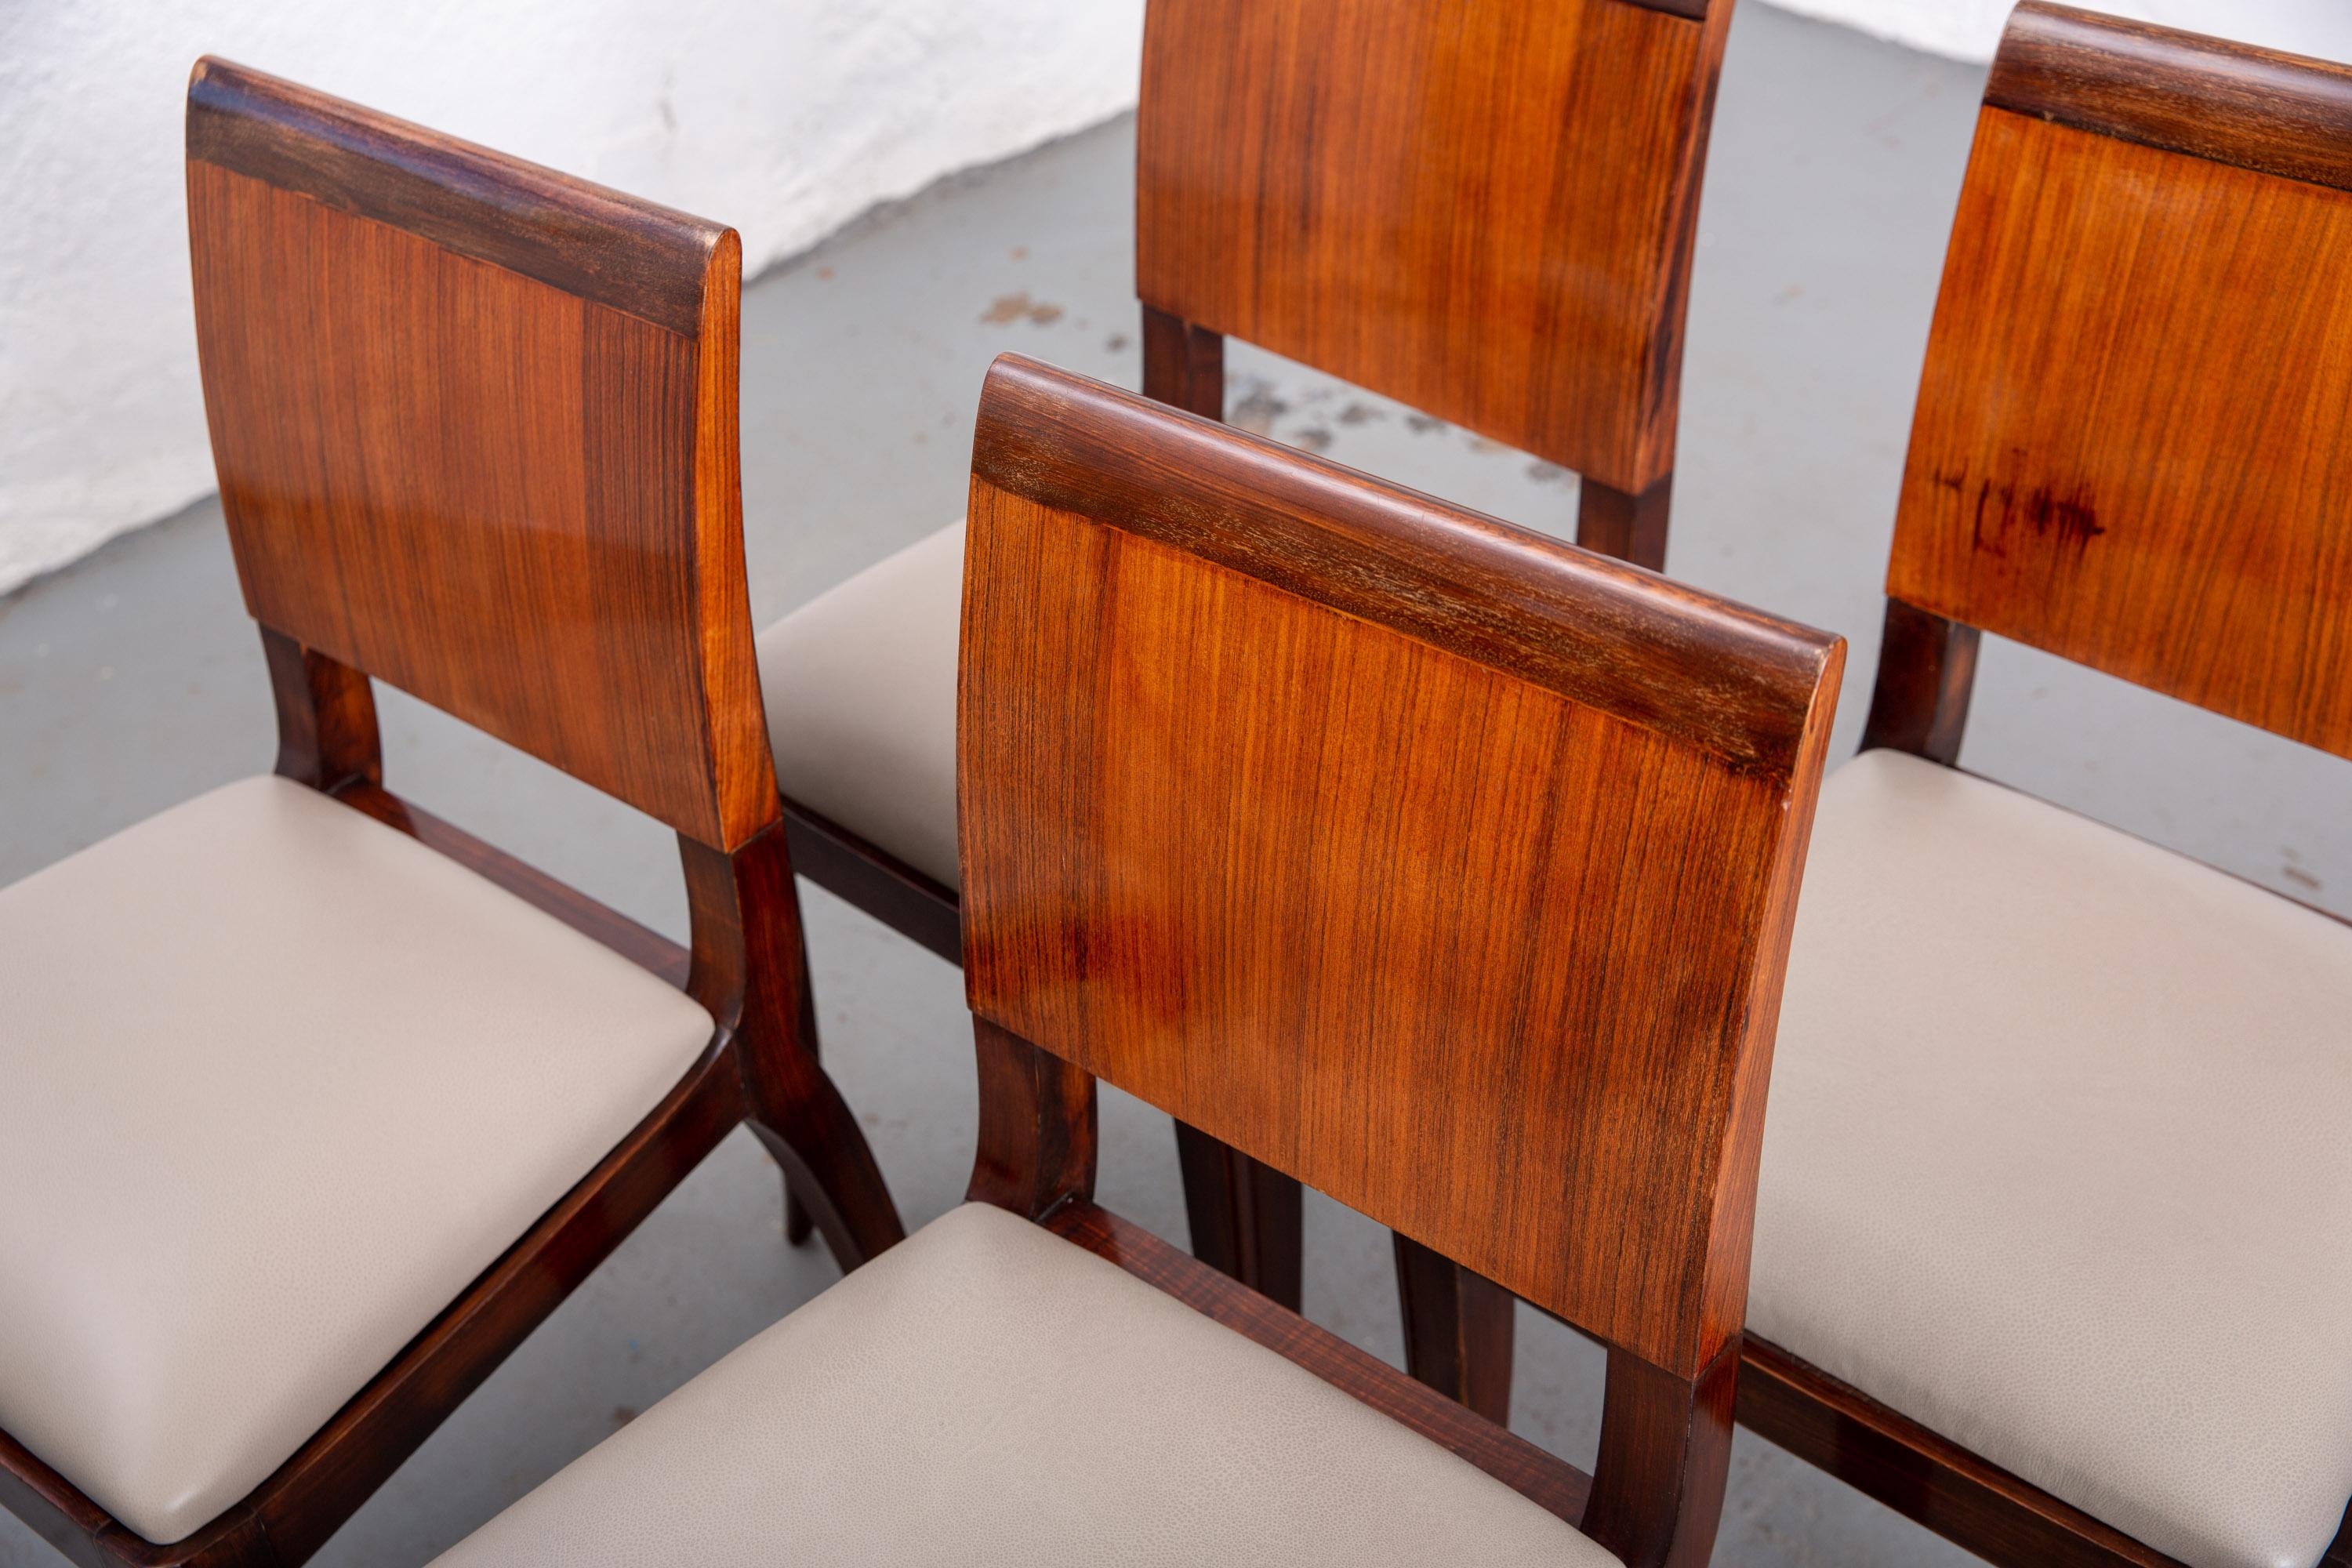 Set of 4 beautiful Art Deco dining chairs with solid panel back and curved and tapered legs. Newly upholstered in high quality leather. Sturdy. Original condition with great age to wood.